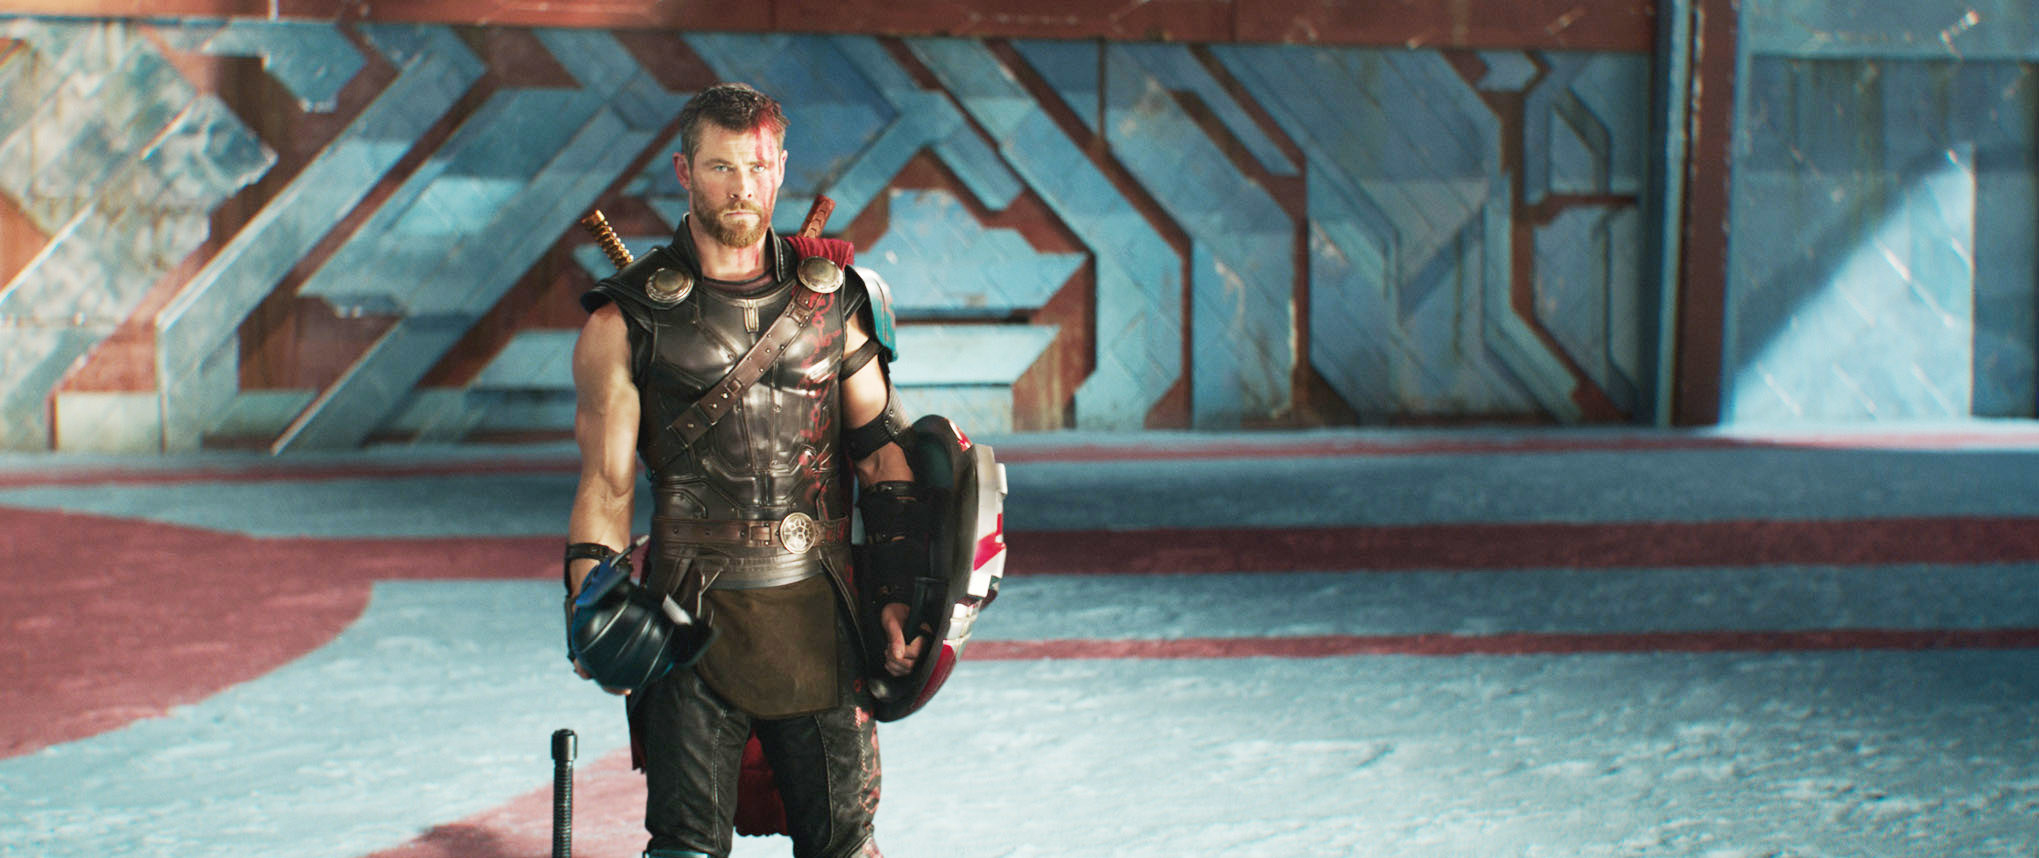 Thor stands in an arena